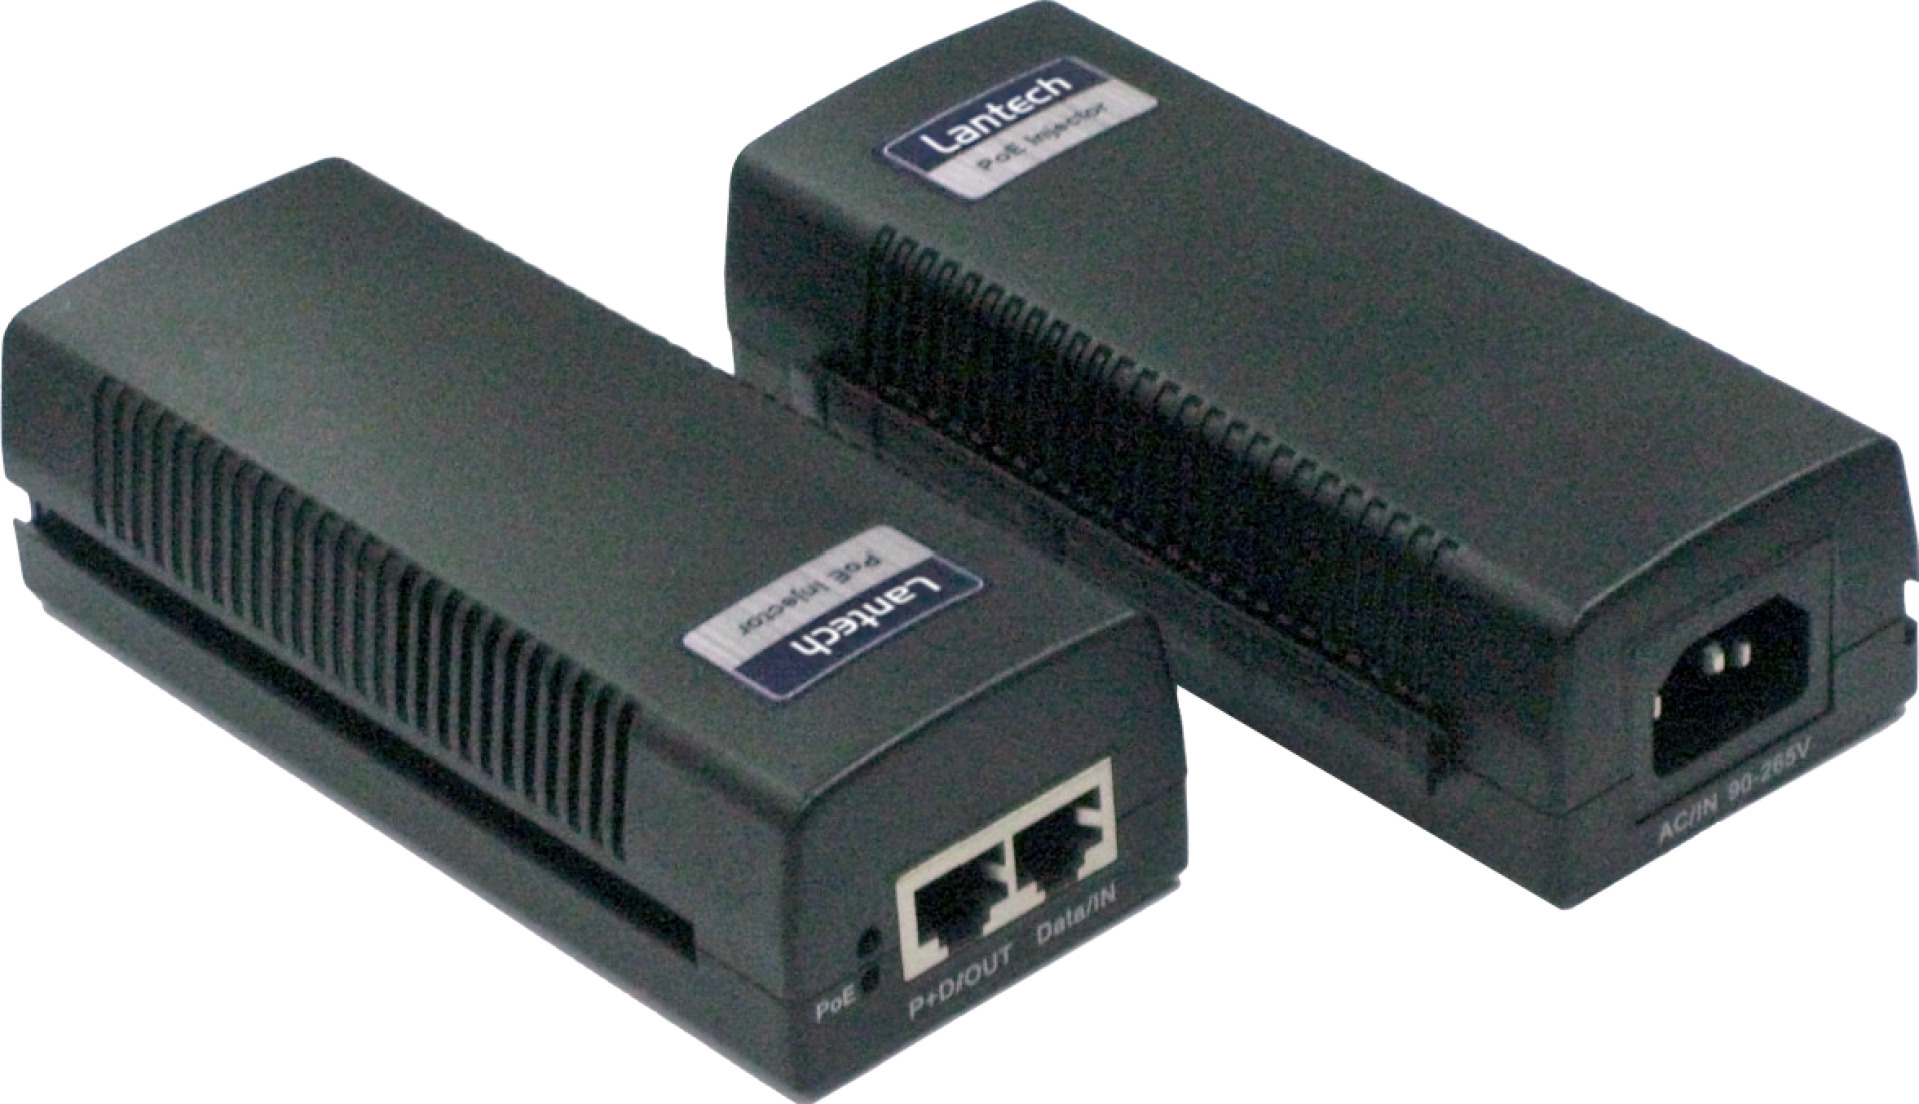 Gigabit Ethernet PoE+ Injector up to 30W